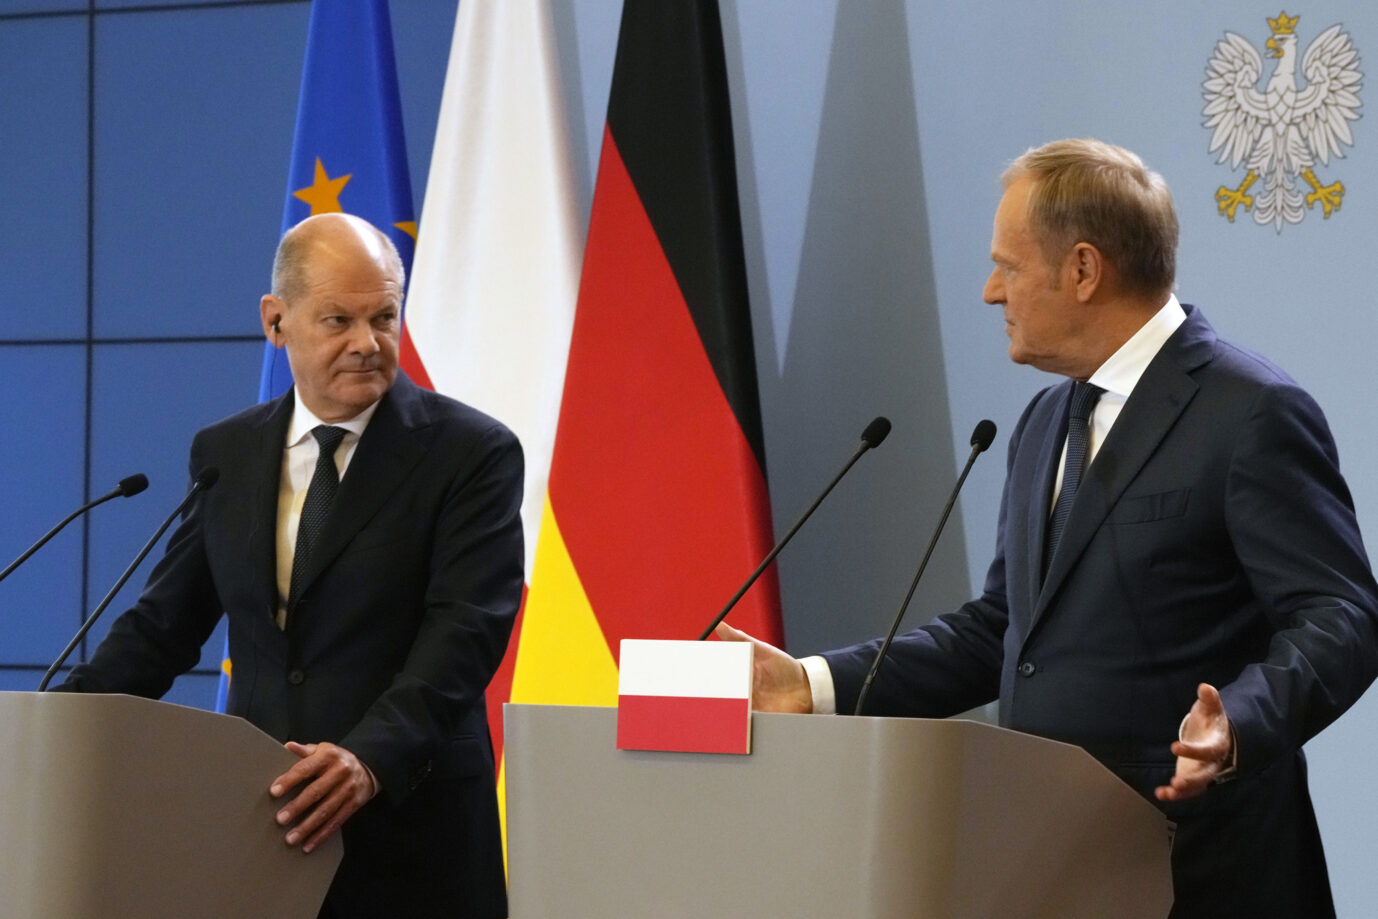 Scholz wants compensation for Polish victims of the German occupation